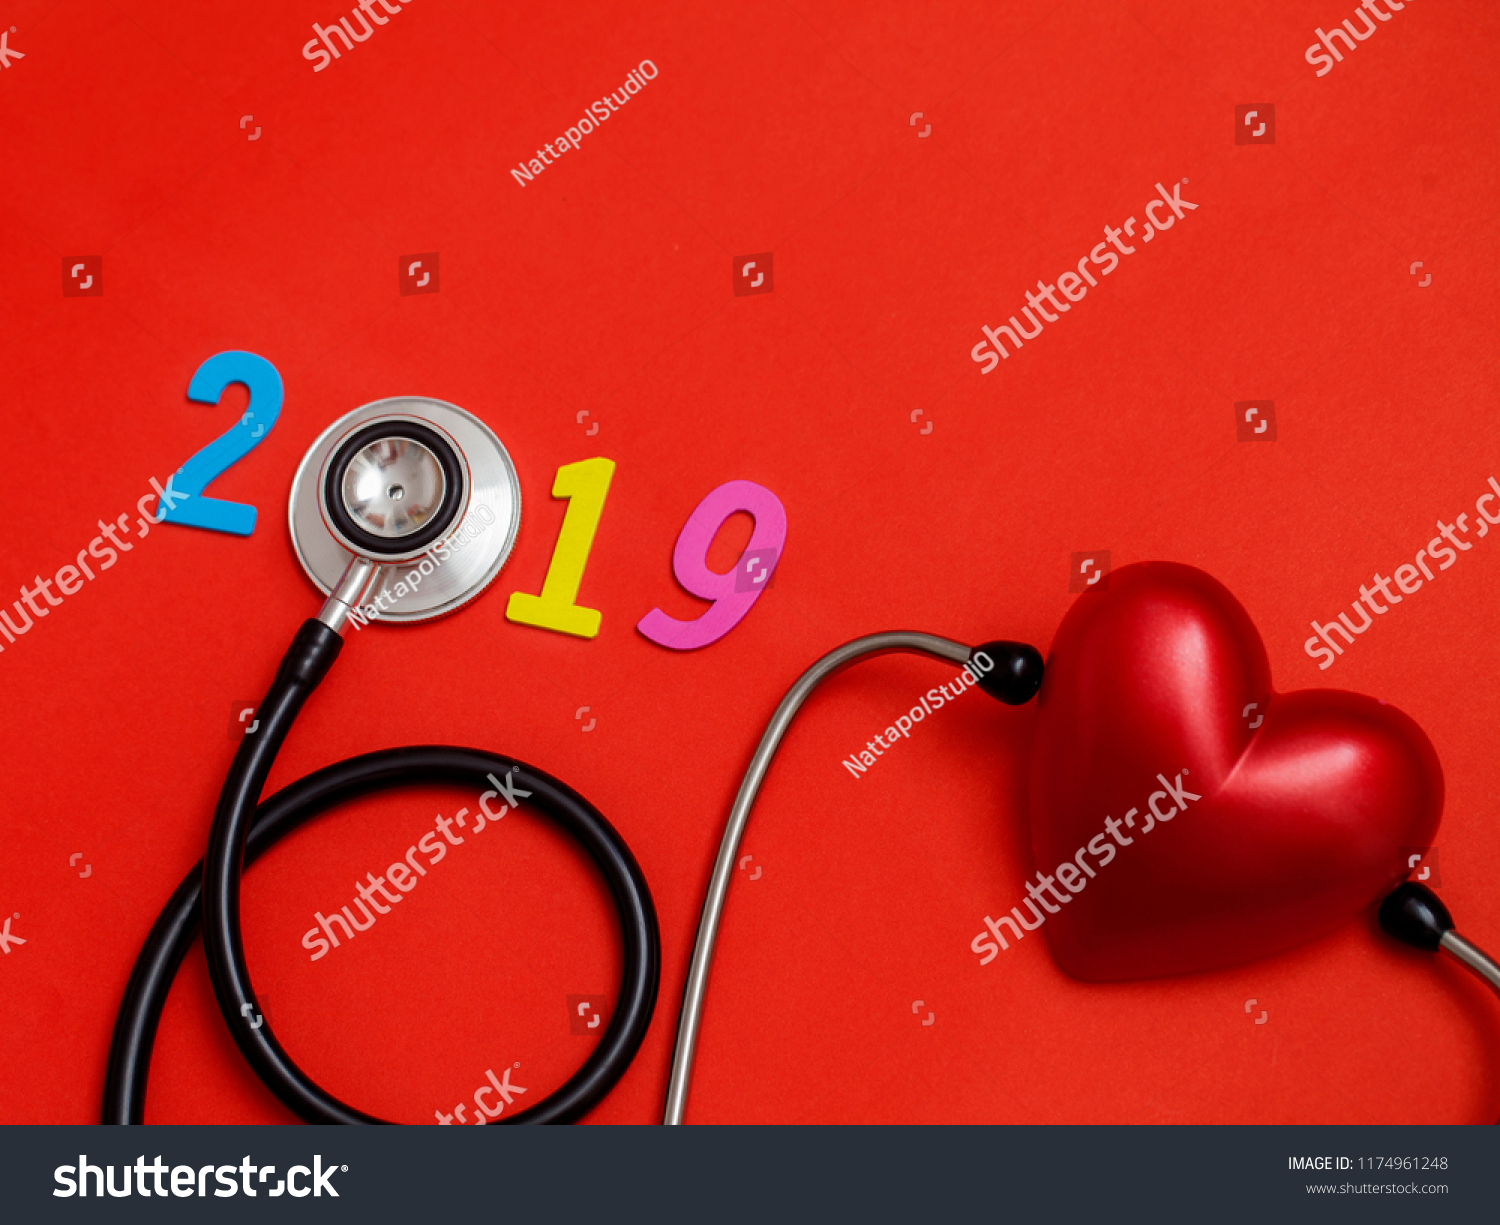 Wooden colorful on text 2019 banner for health care and Red heart love medical concept. black stethoscope,on table red background. #1174961248